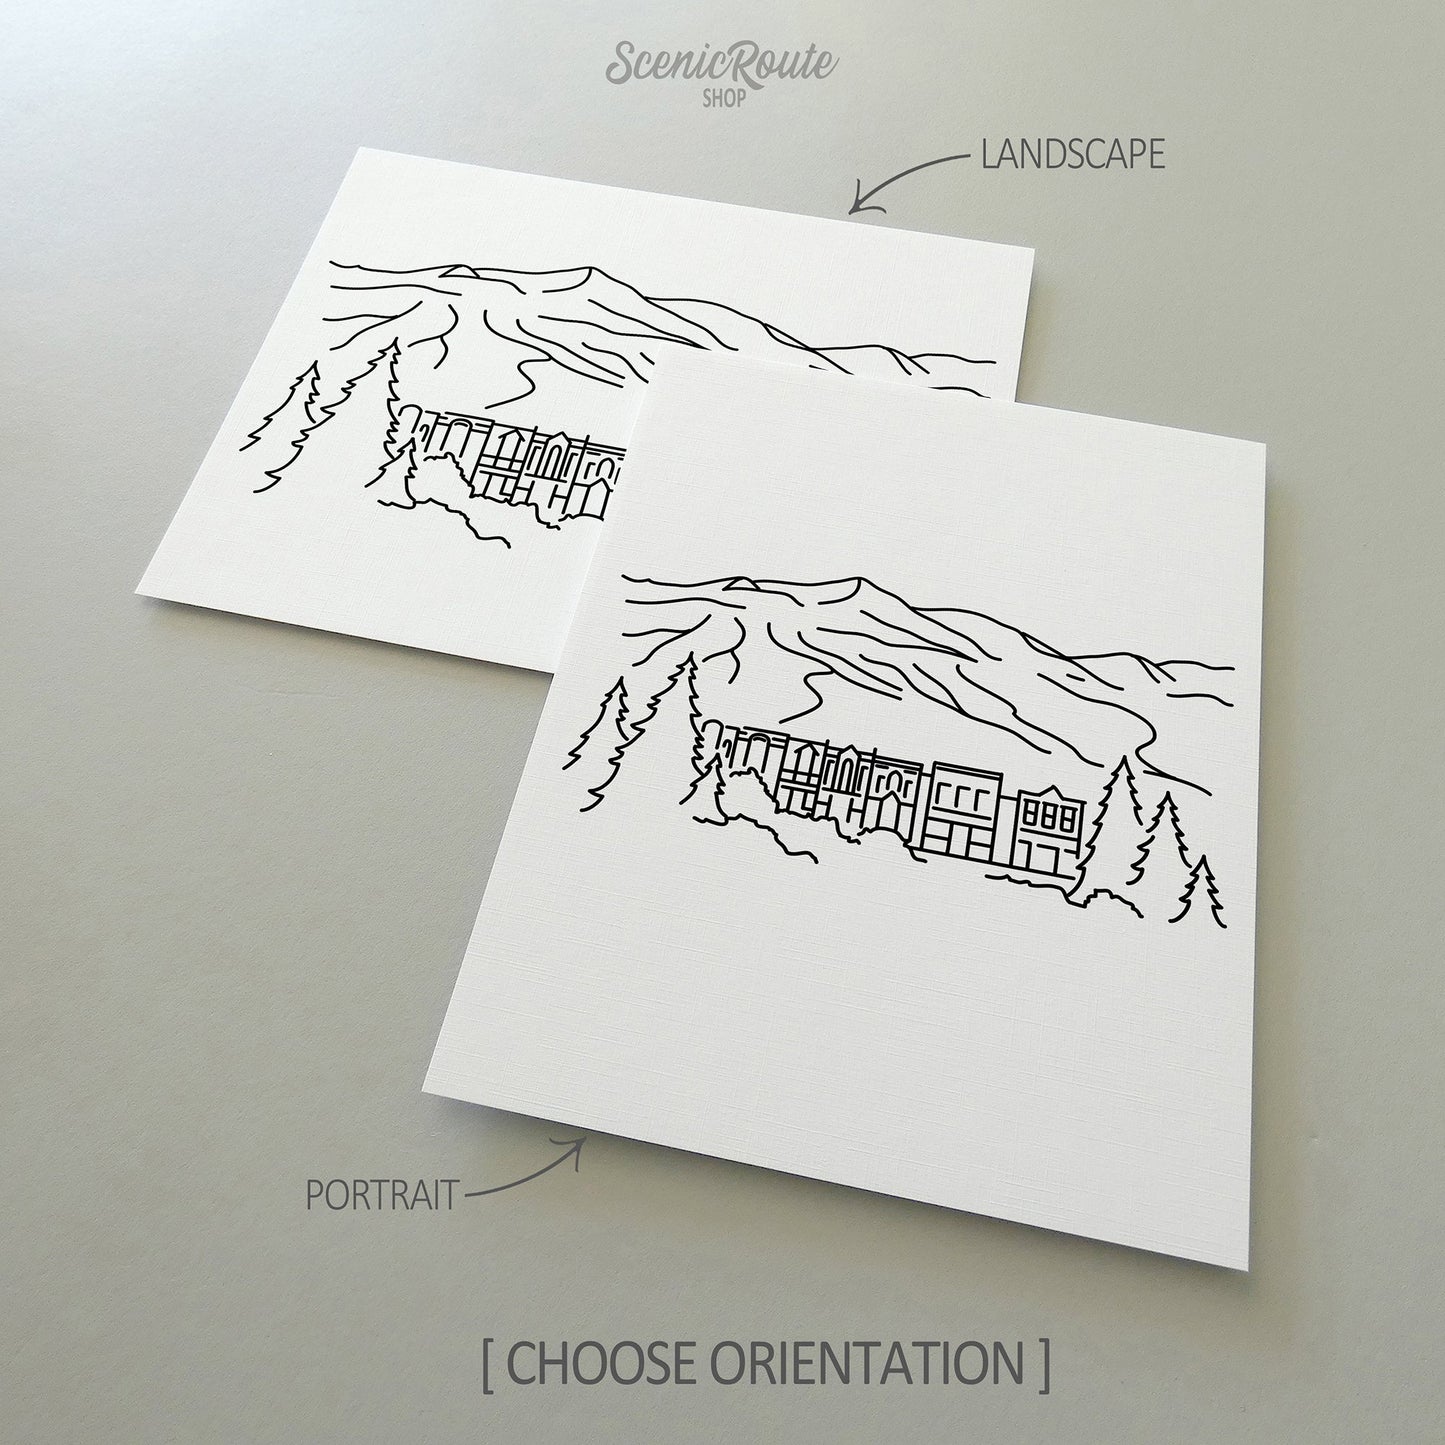 Two line art drawings of Breckenridge on white linen paper with a gray background.  The pieces are shown in portrait and landscape orientation for the available art print options.